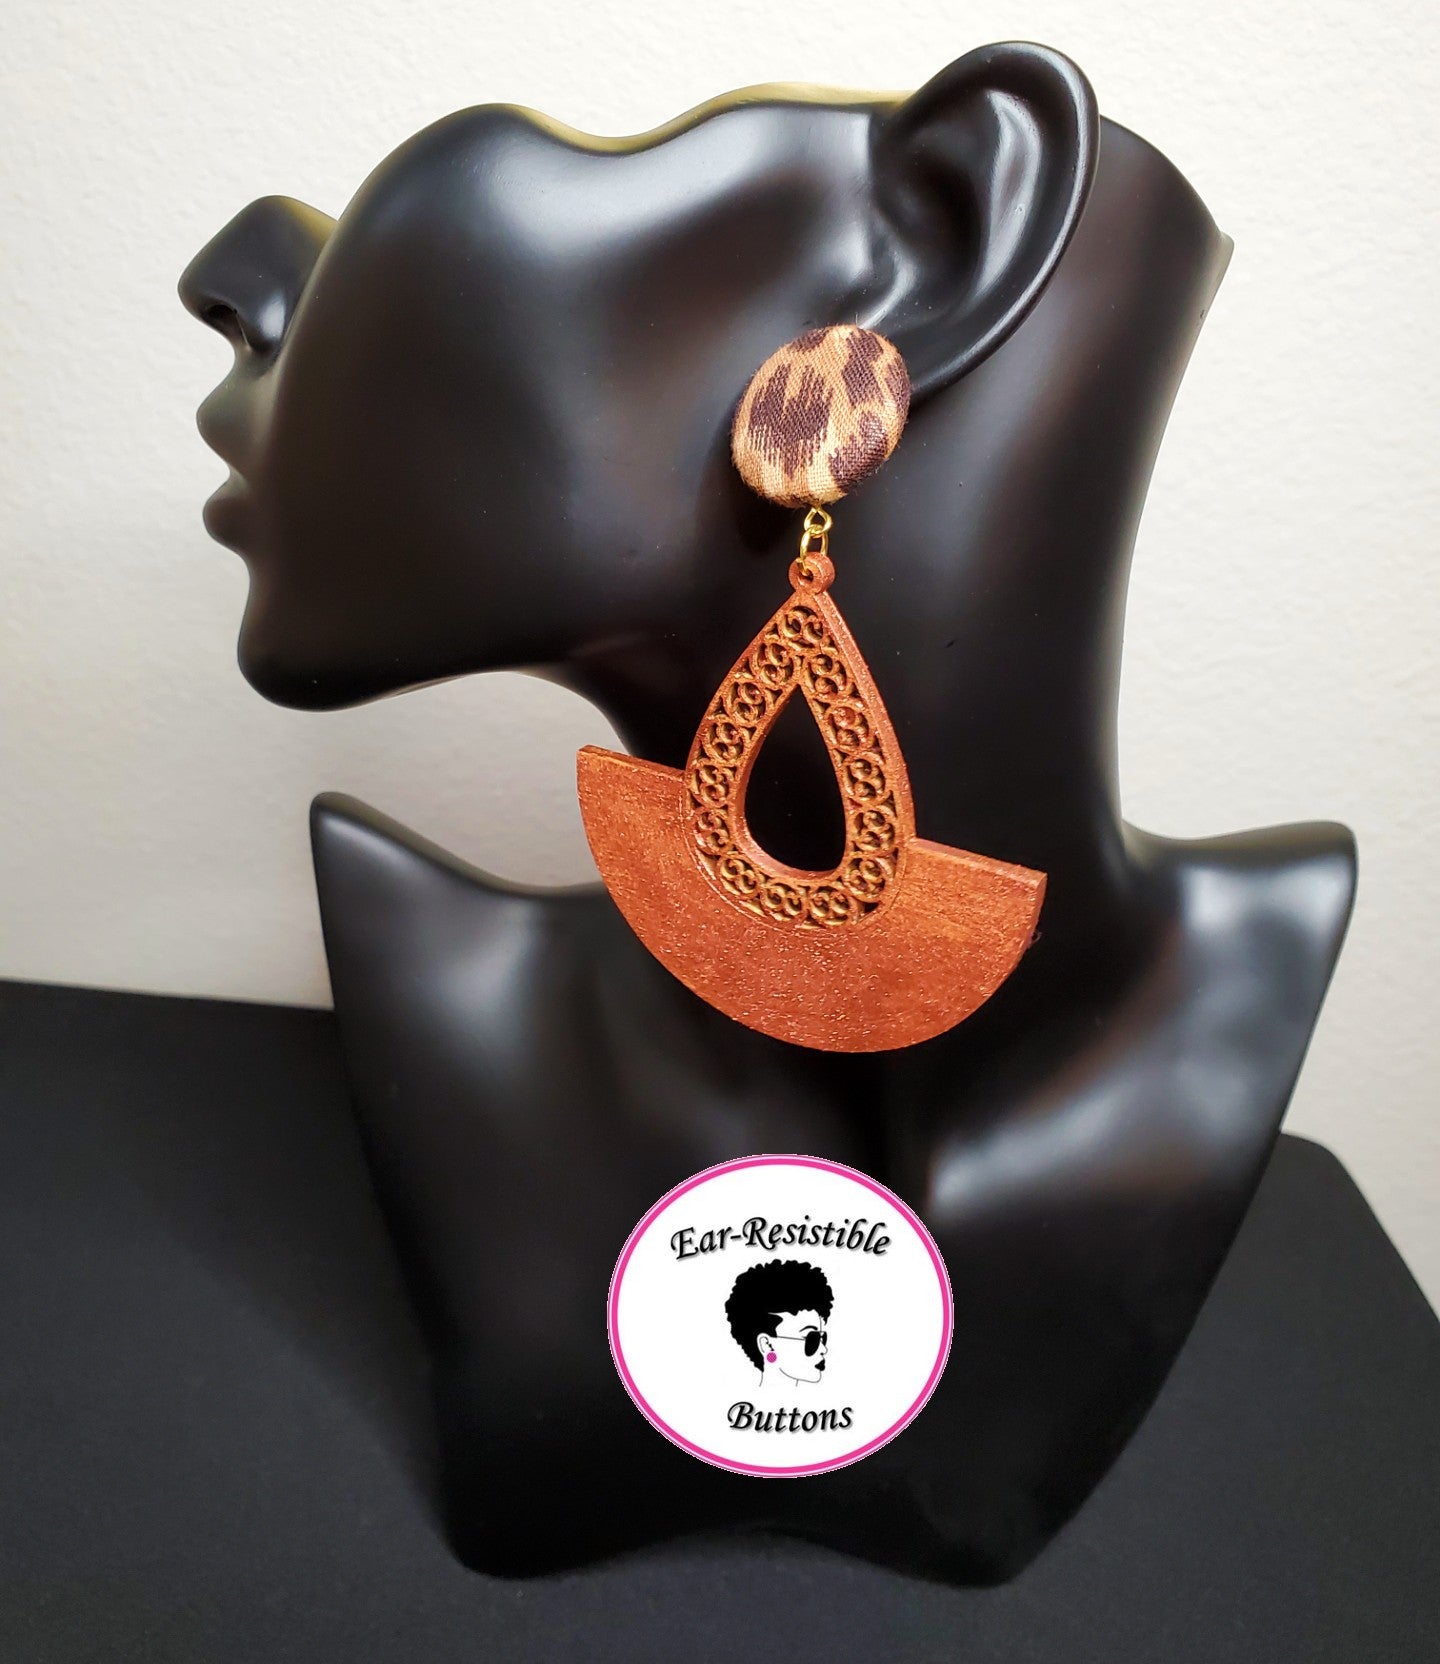 earring model wearing cheetah print button stud earring with attached copper colored wooden accessory